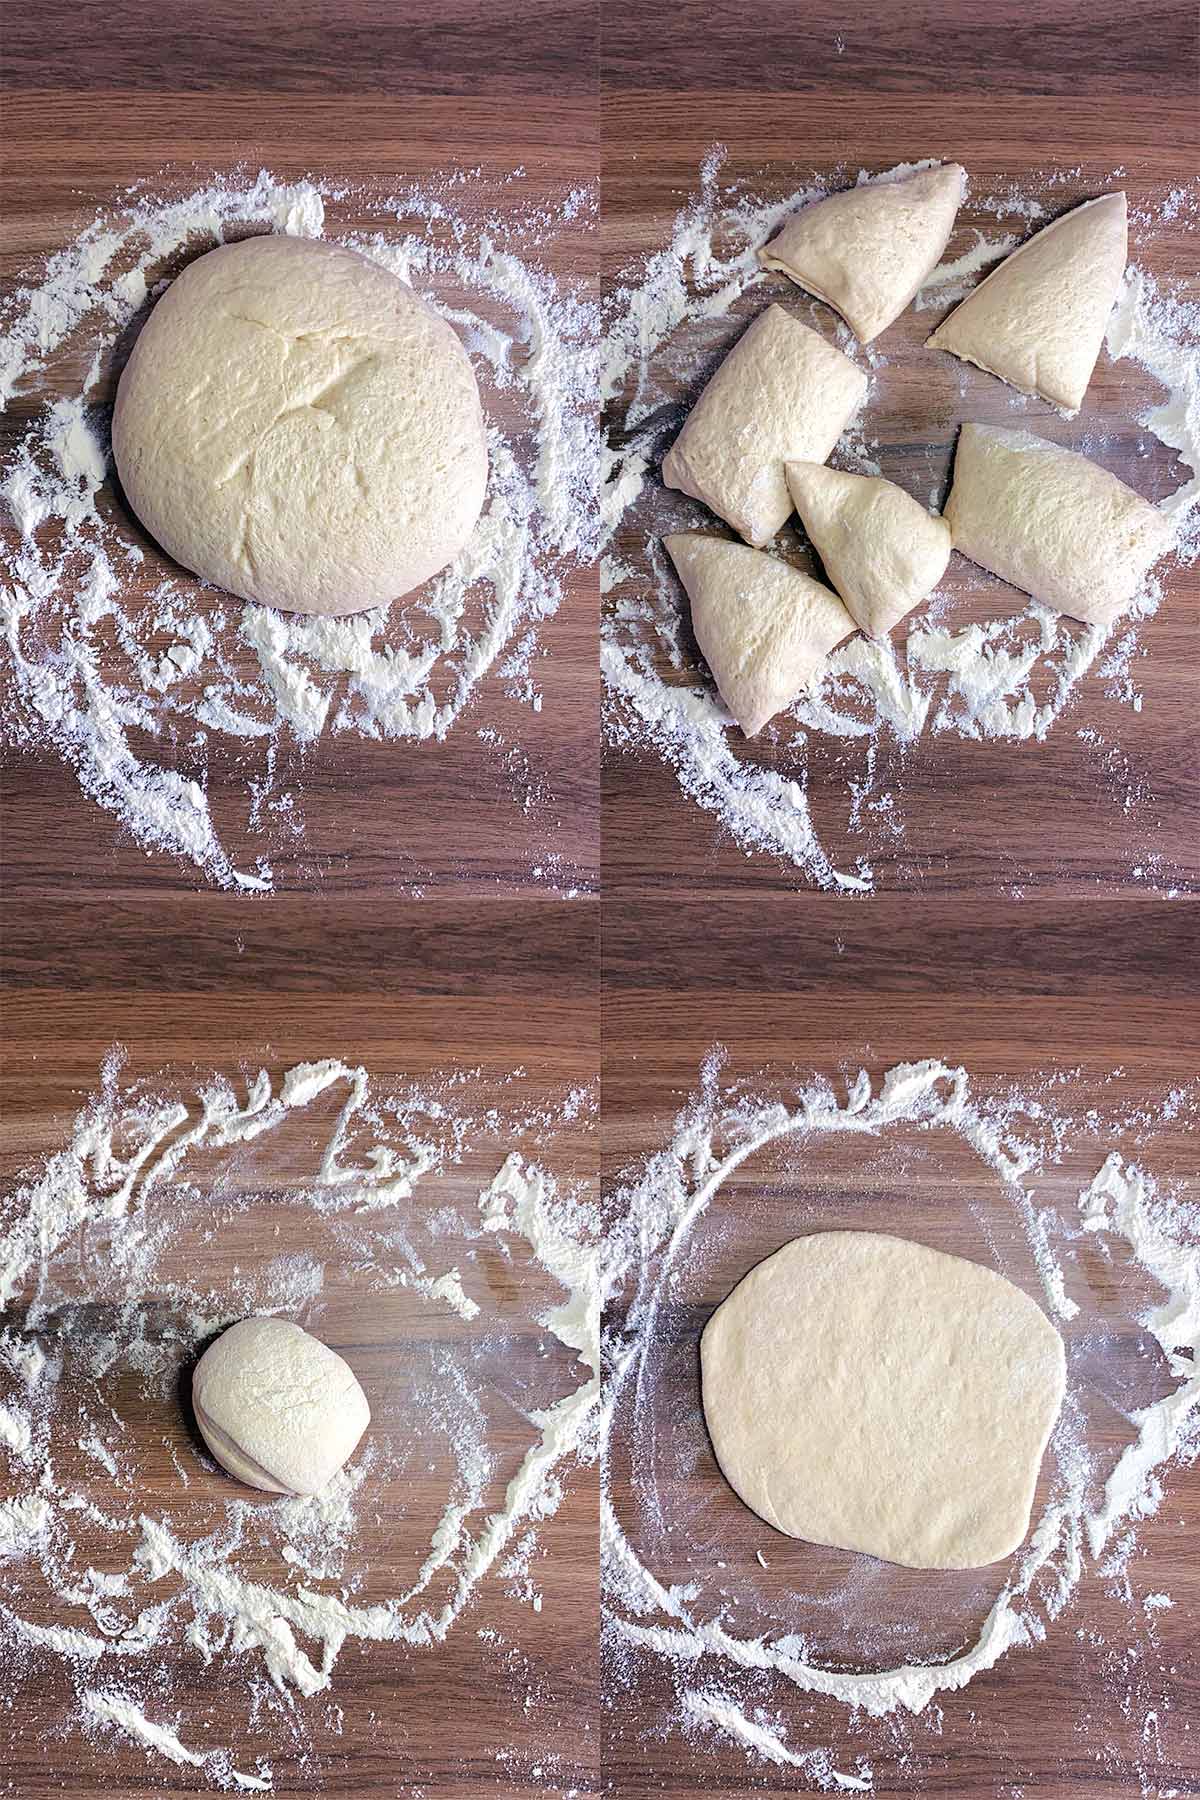 Four shot collage of a proofed dough on a surface, then cut into six pieces, then one piece rolled into a ball, then rolled out flat.